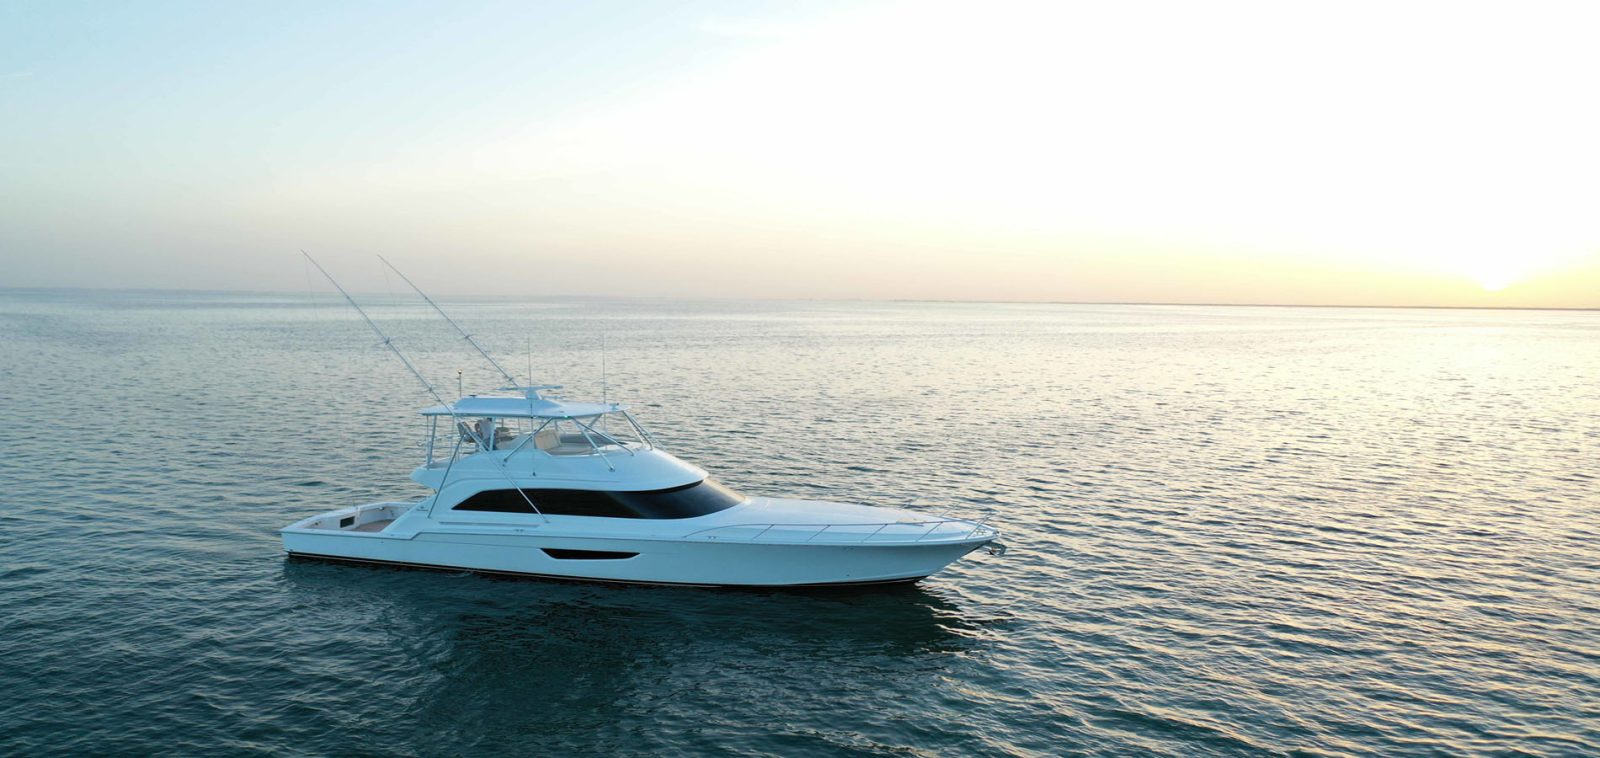 Betram Yachts 61 Convertible sportfisher cruising past a clear horizon at sunset on the open ocean.